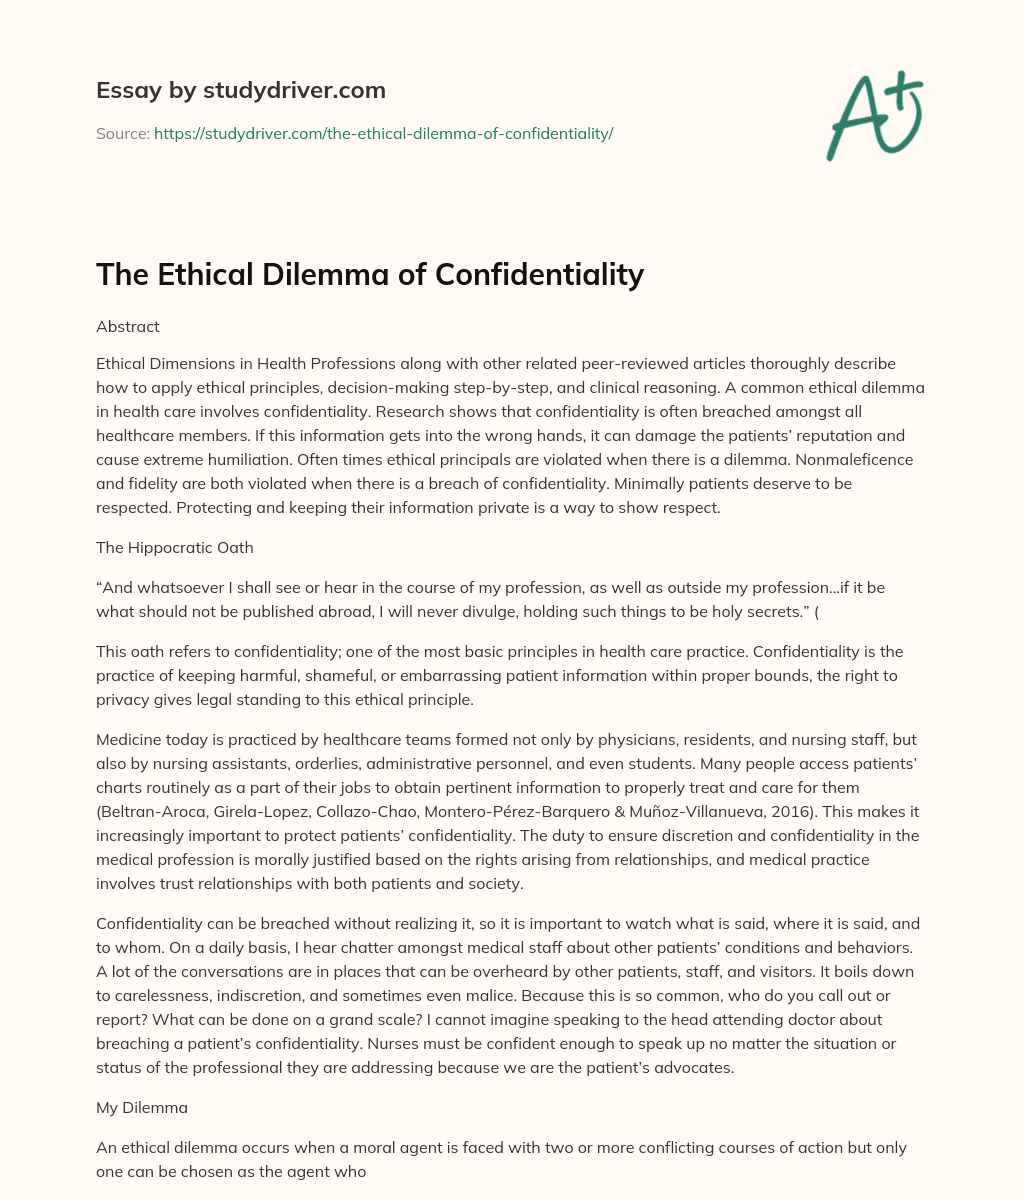 The Ethical Dilemma of Confidentiality essay